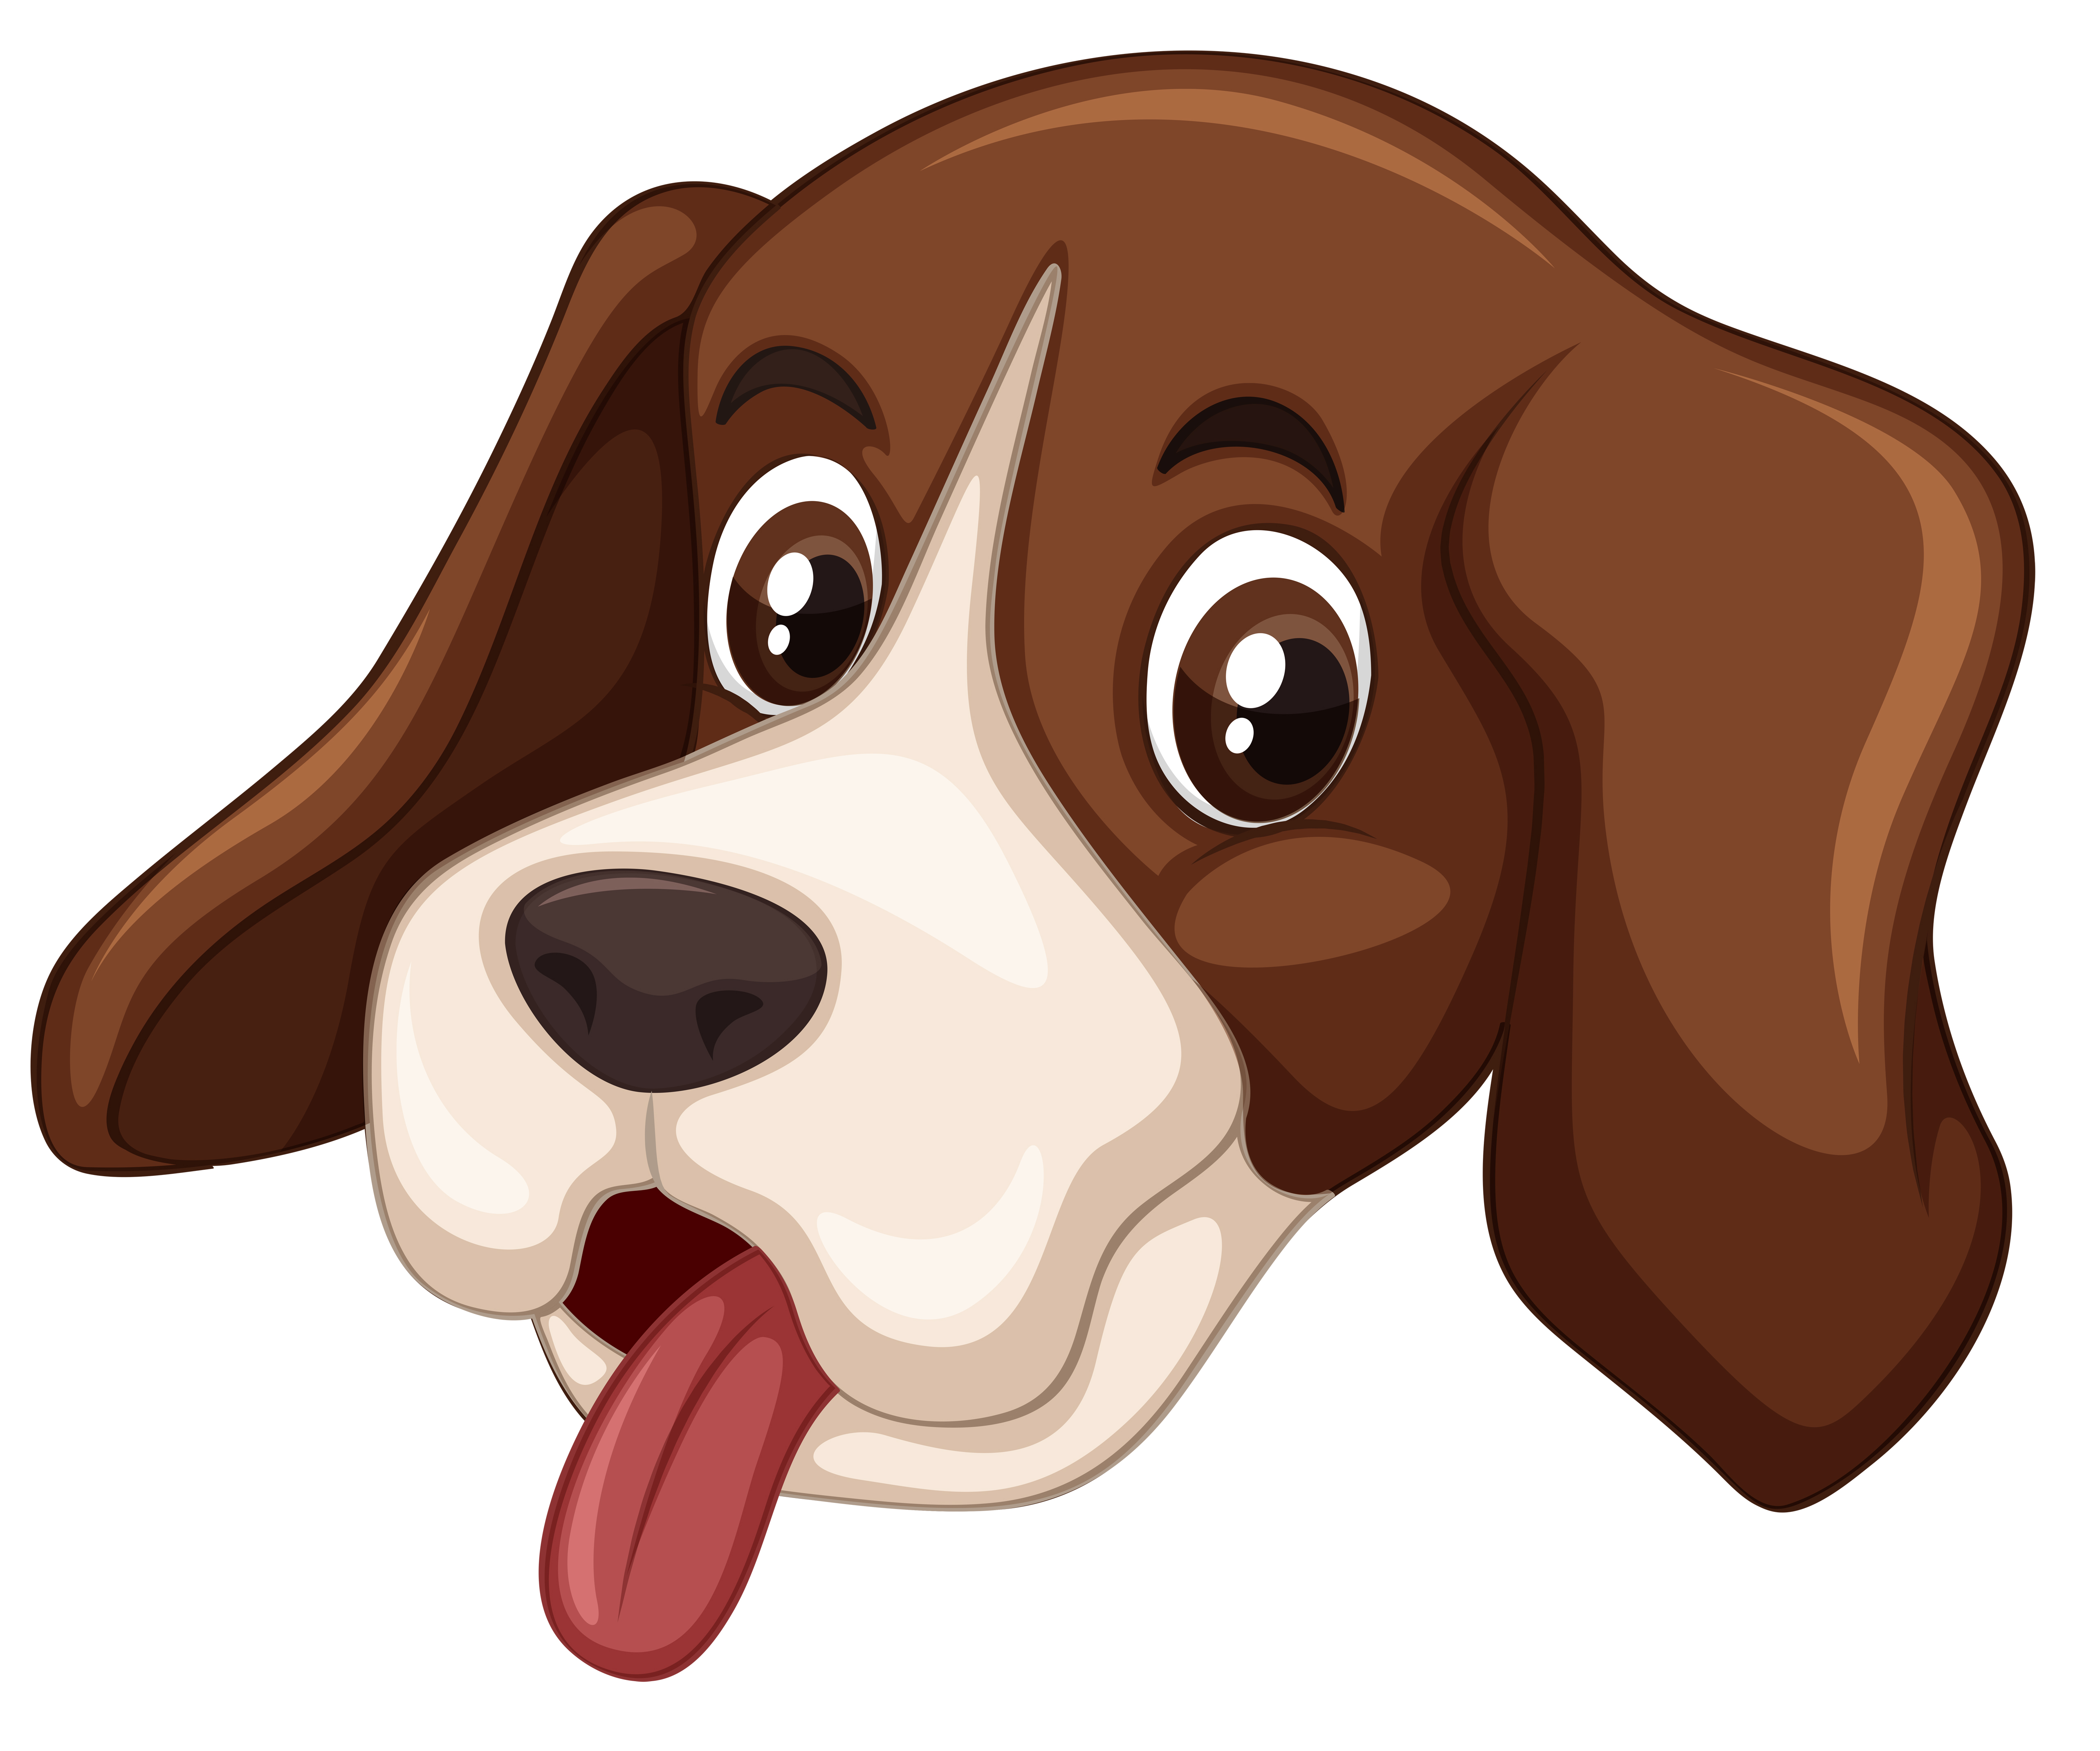 Download dog head white background - Download Free Vectors, Clipart ...